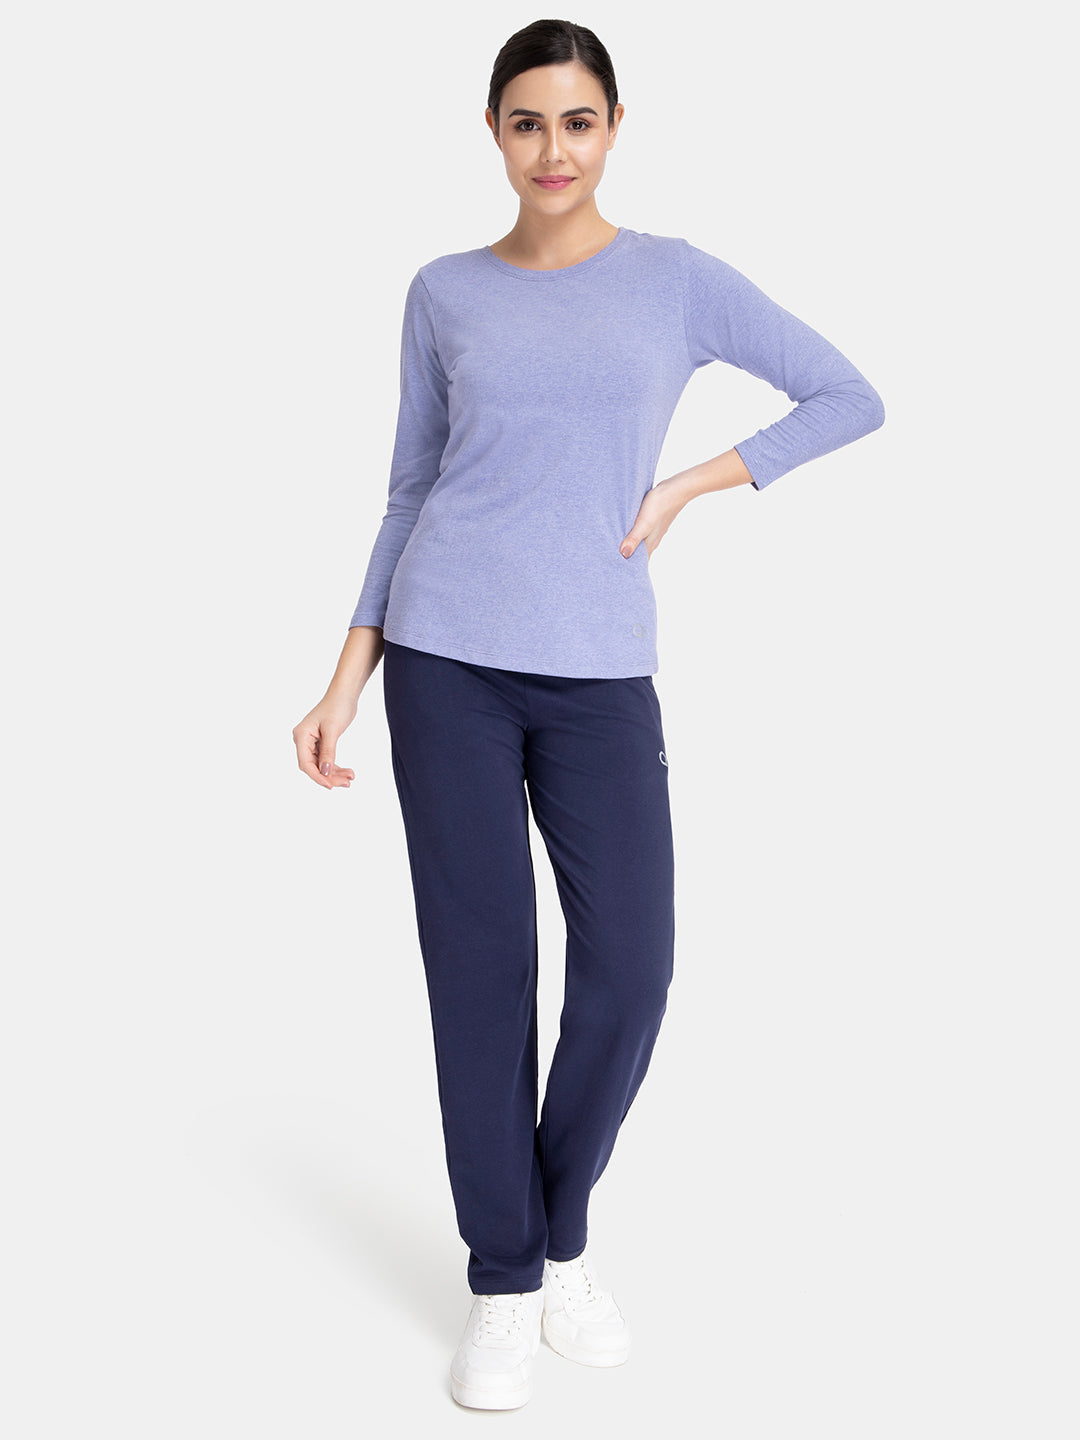 Essential Long Sleeve Round Neck T-Shirt - Infinity Blue Marl